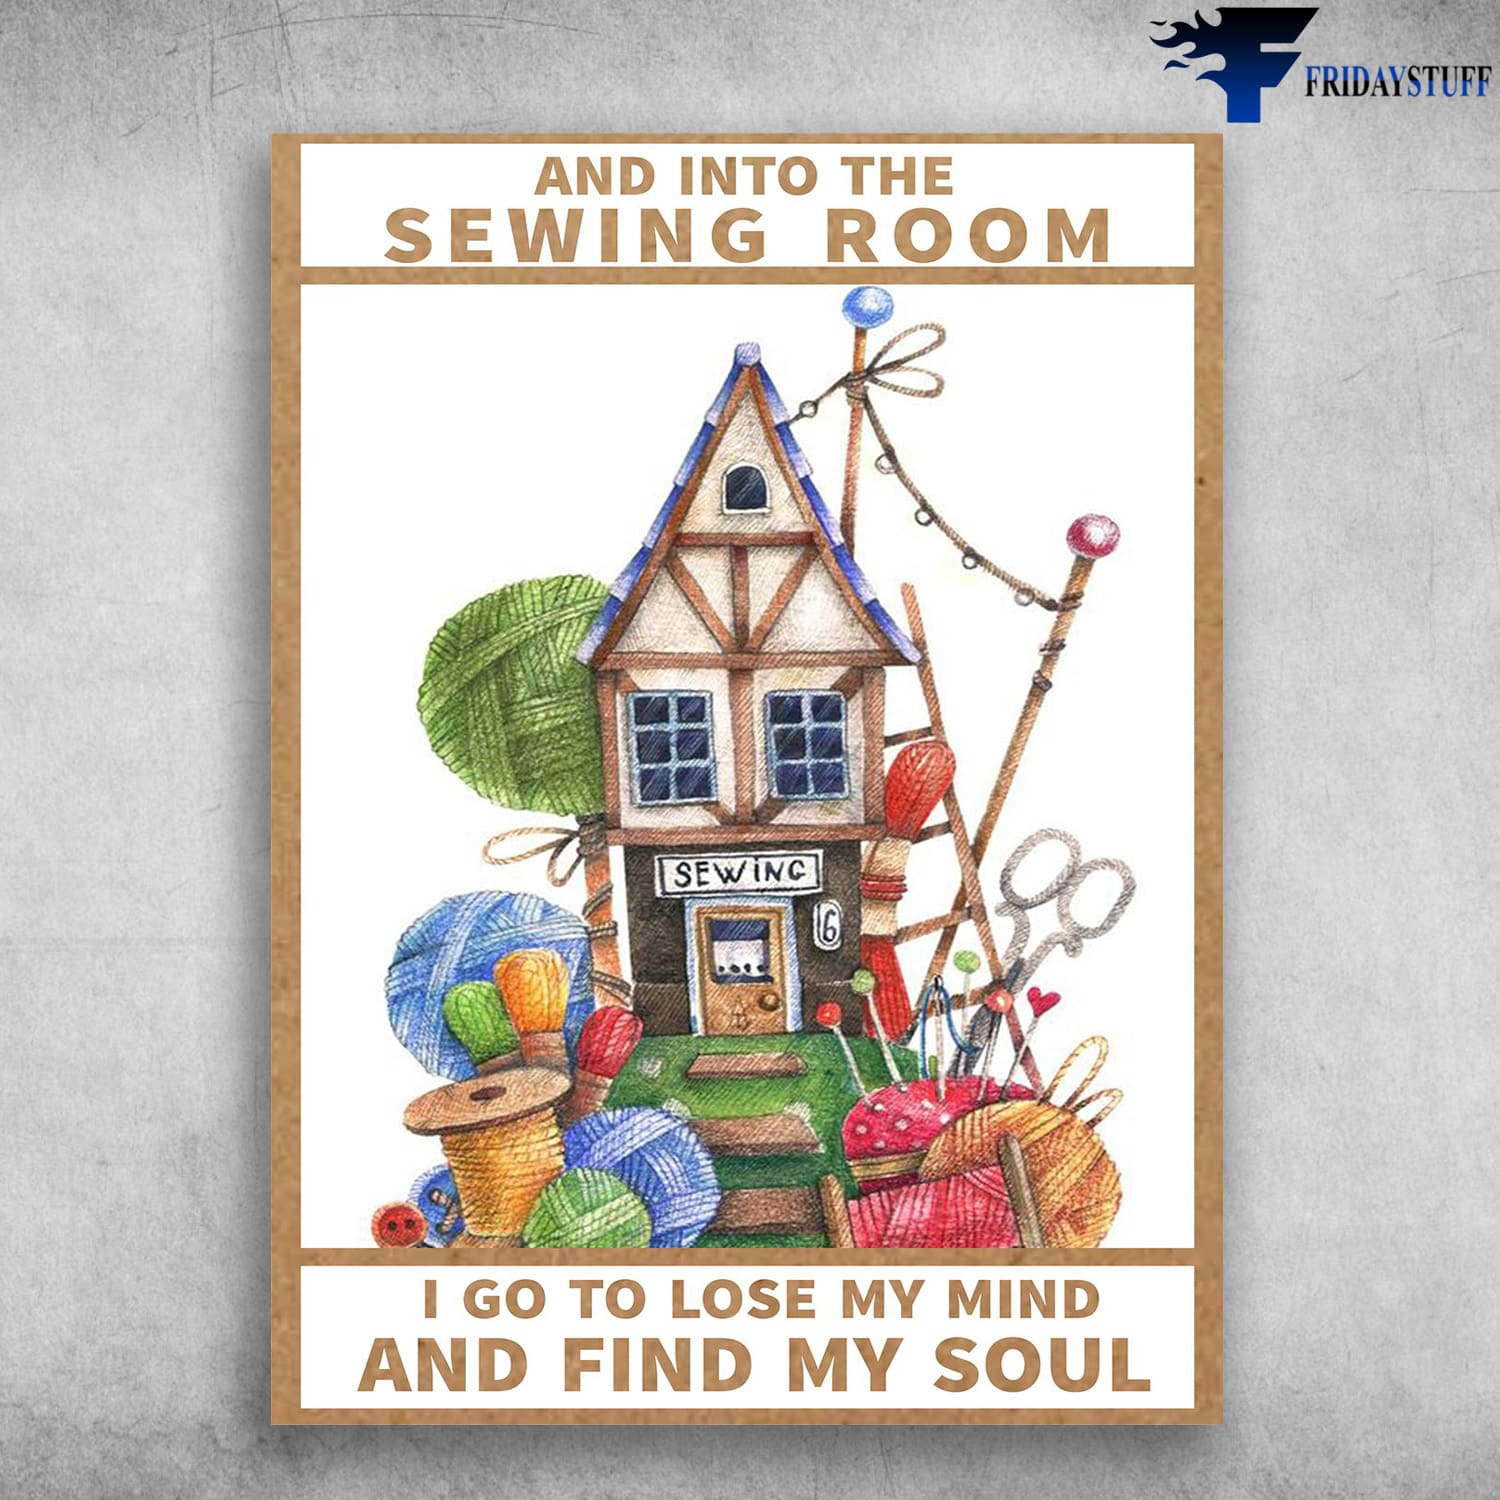 Sewing House, Sewing Poster, And Into The Sewing Room, I Go To Lose My Mind, And Find My Soul